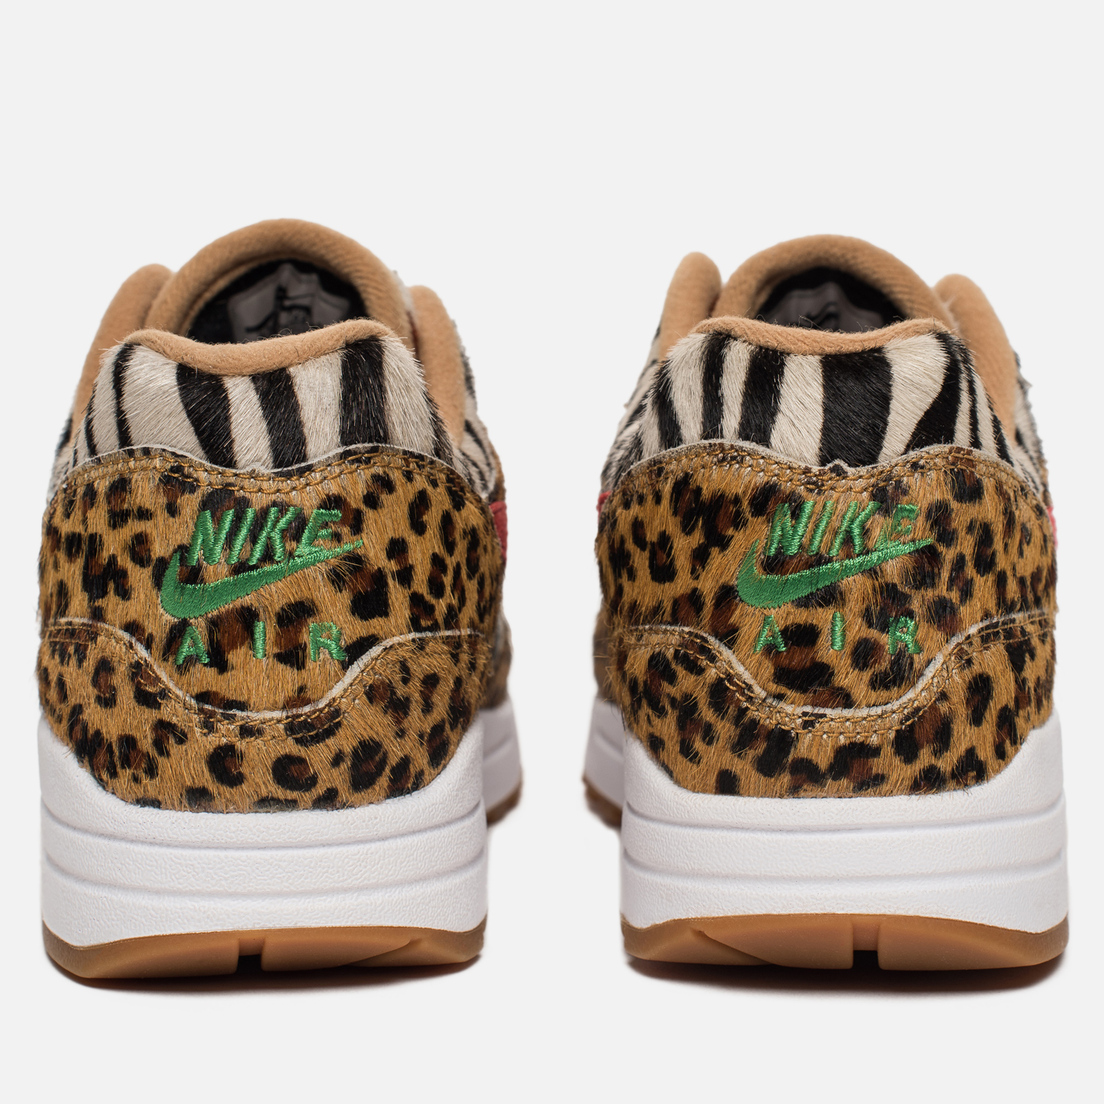 Nike Кроссовки x atmos Air Max 1 Deluxe Animal Pack 2.0